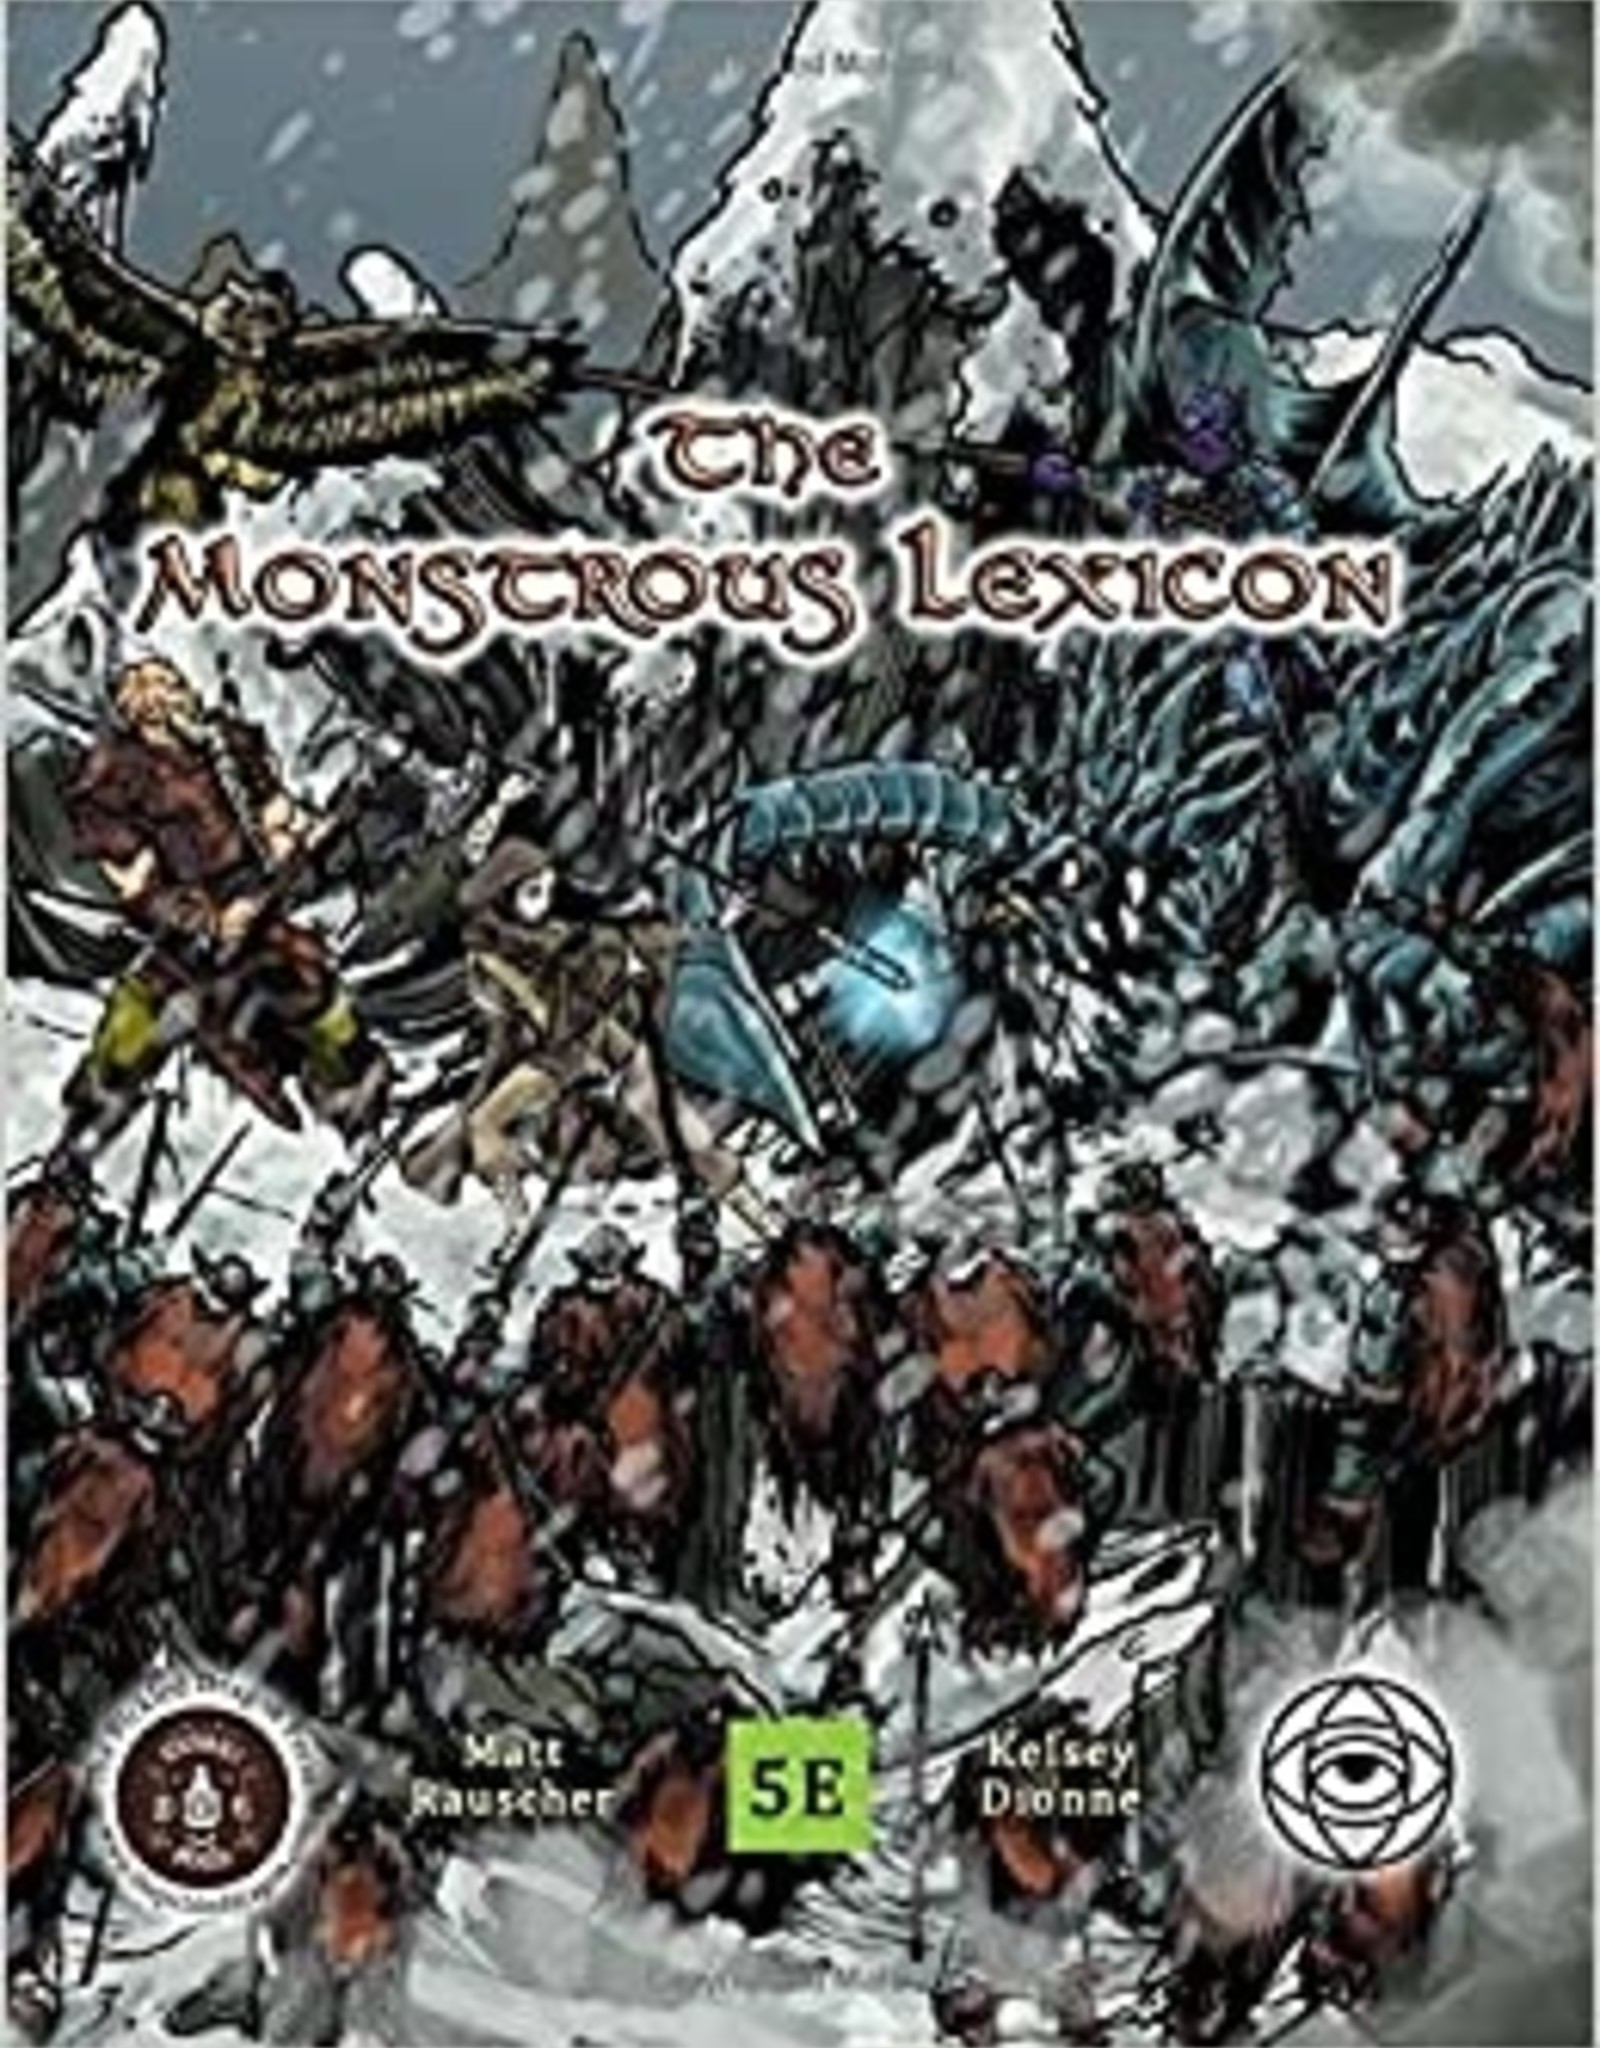 The Pickled Dragon D & D: Pickled Dragon Monstrous Lexicon (Hard Cover)